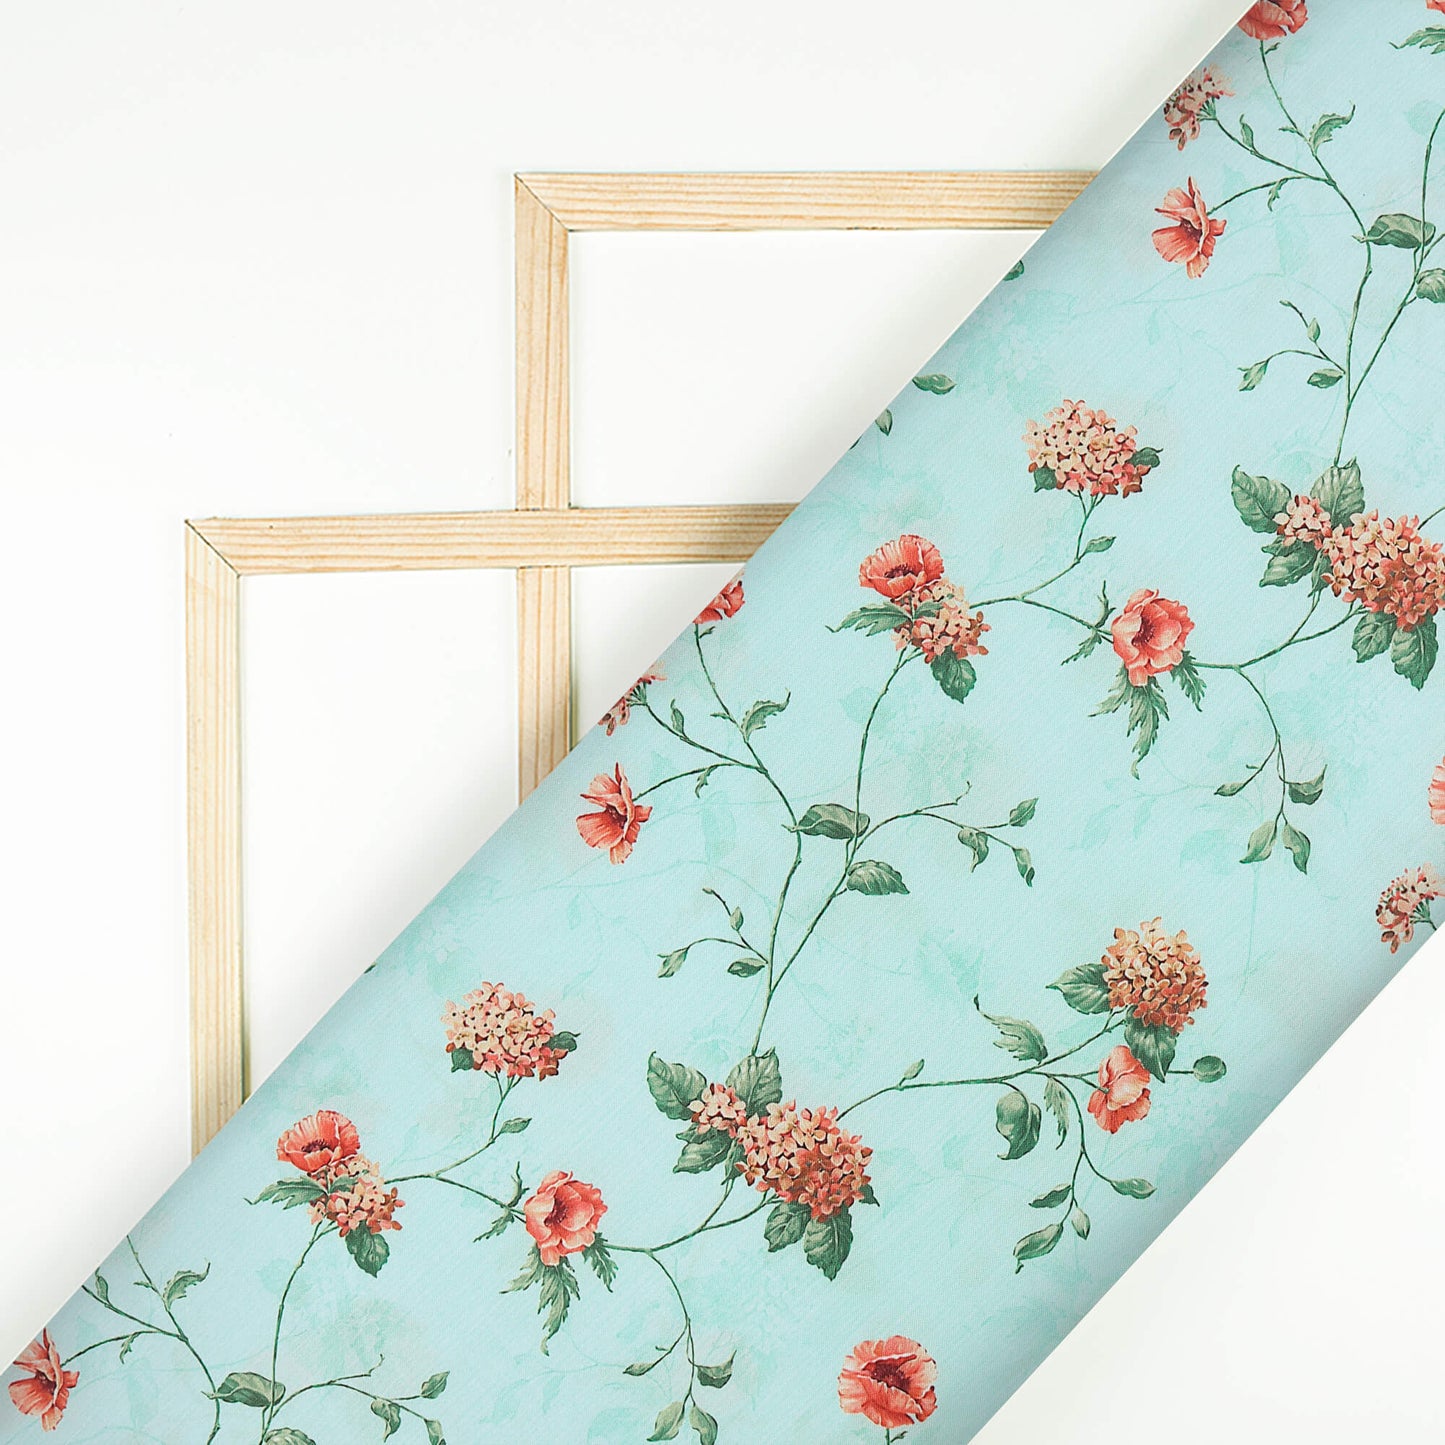 Pale Turquoise And Orange Floral Pattern Digital Print Poly Rayon Fabric (Width 58 Inches)